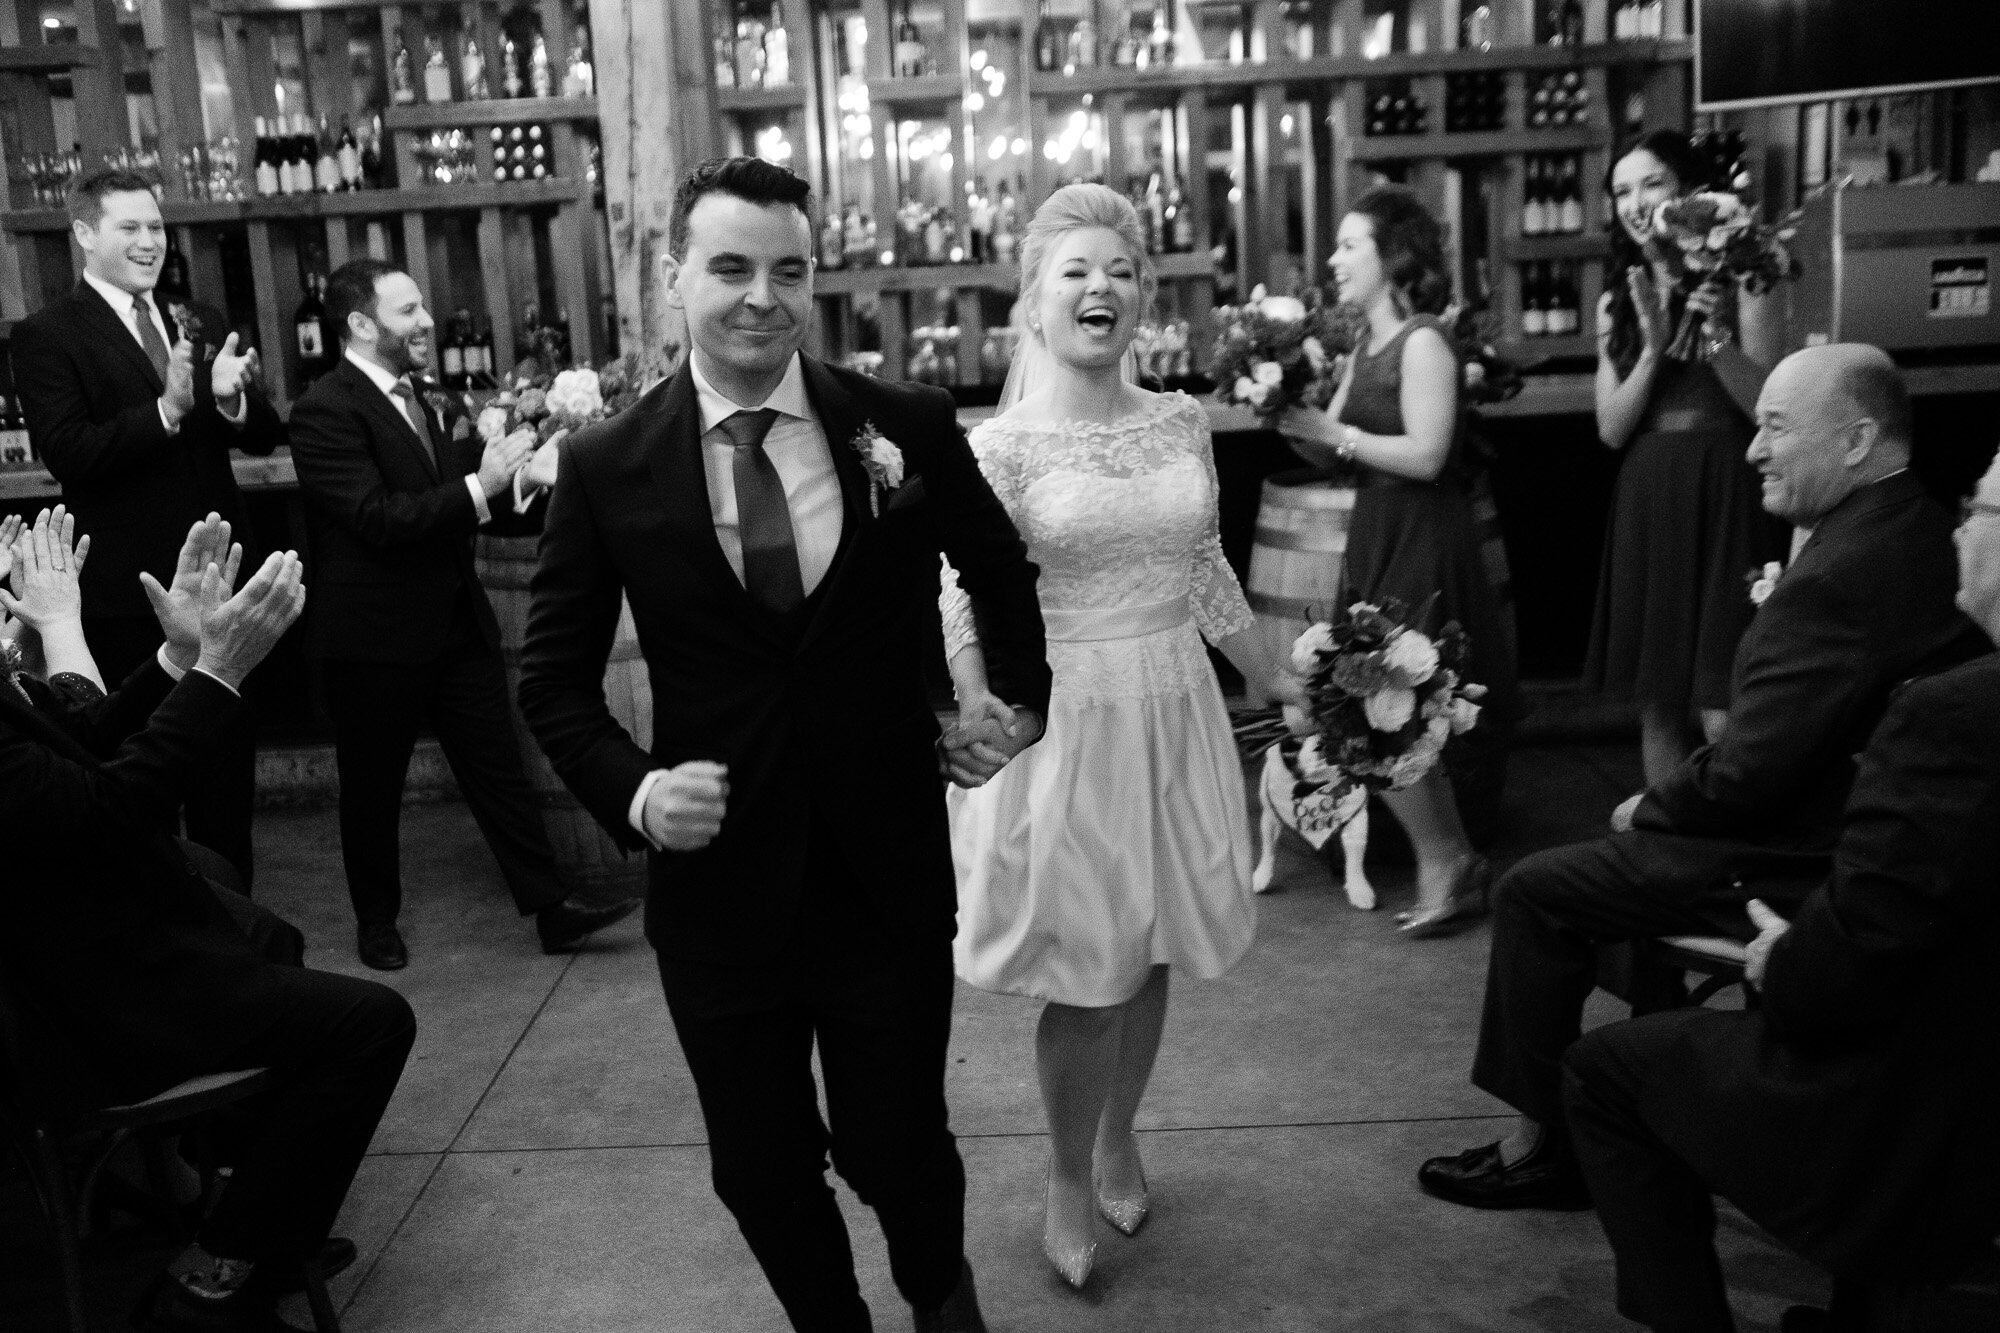  Emily and Aaron dance their way up the aisle after their wedding at Archeo in Toronto’s Distillery district by Toronto Wedding Photographer Scott Williams. 